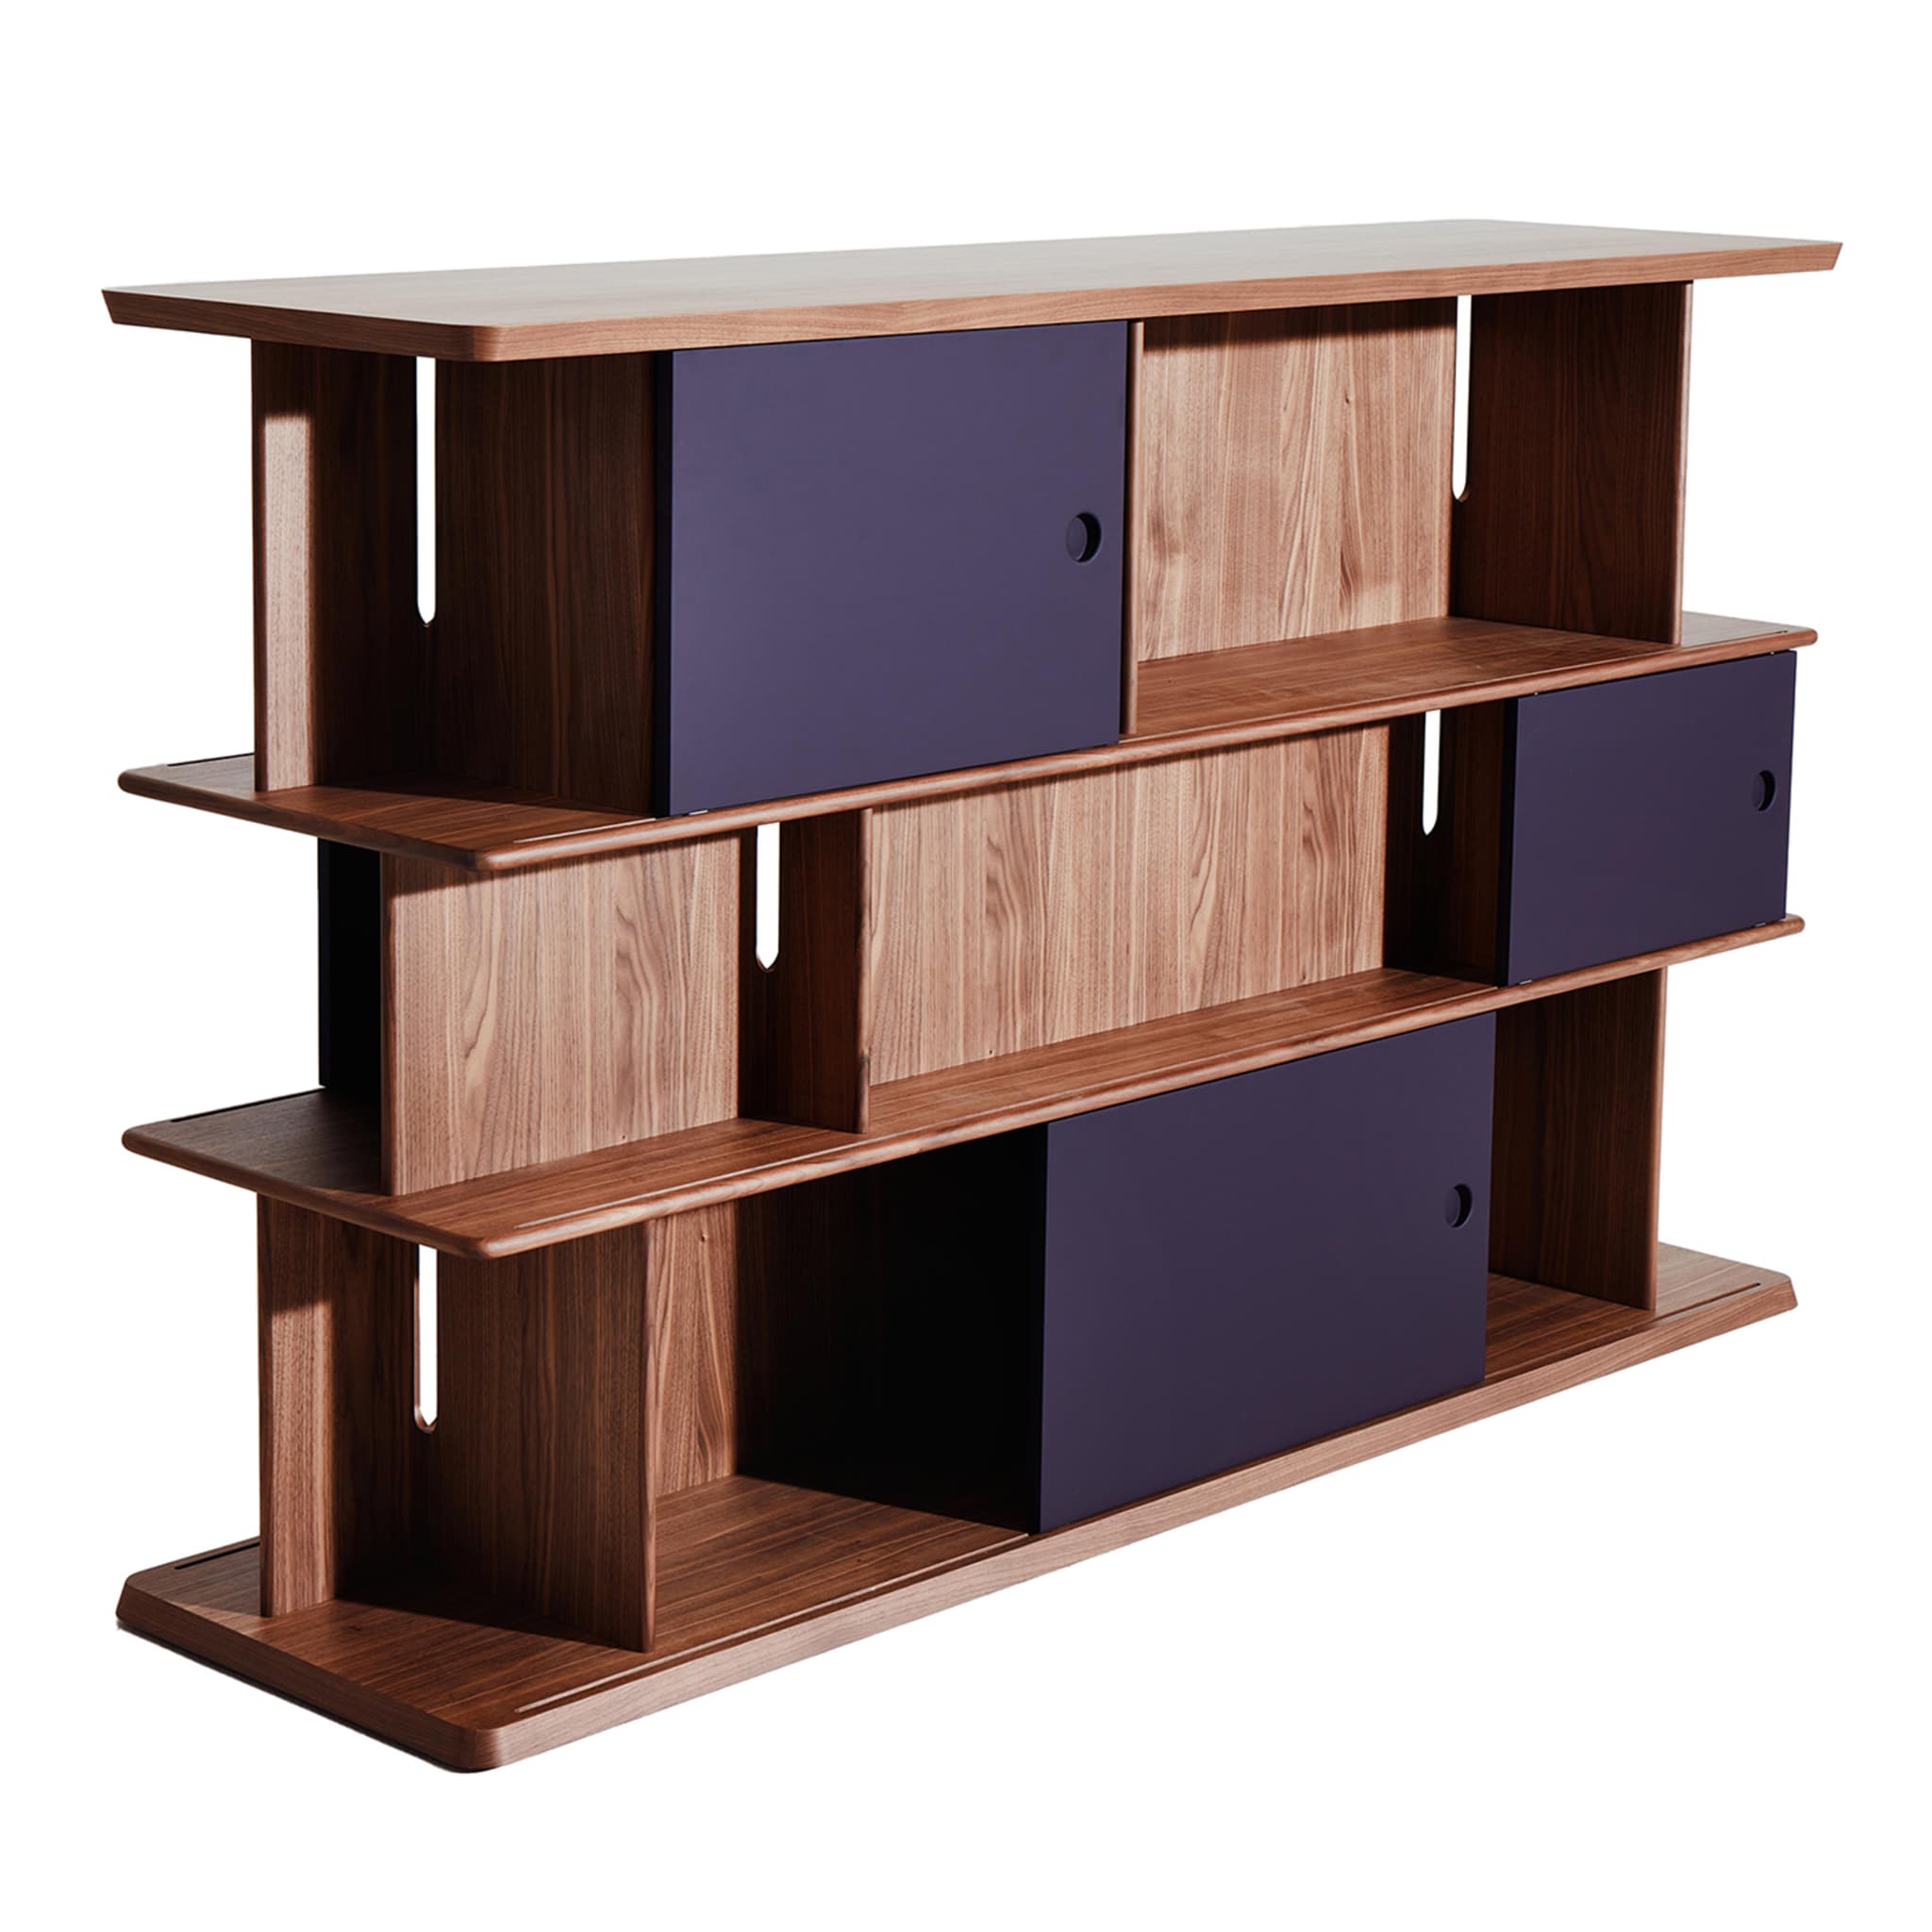 Intersection Small Bookcase by Neri&Hu - Main view